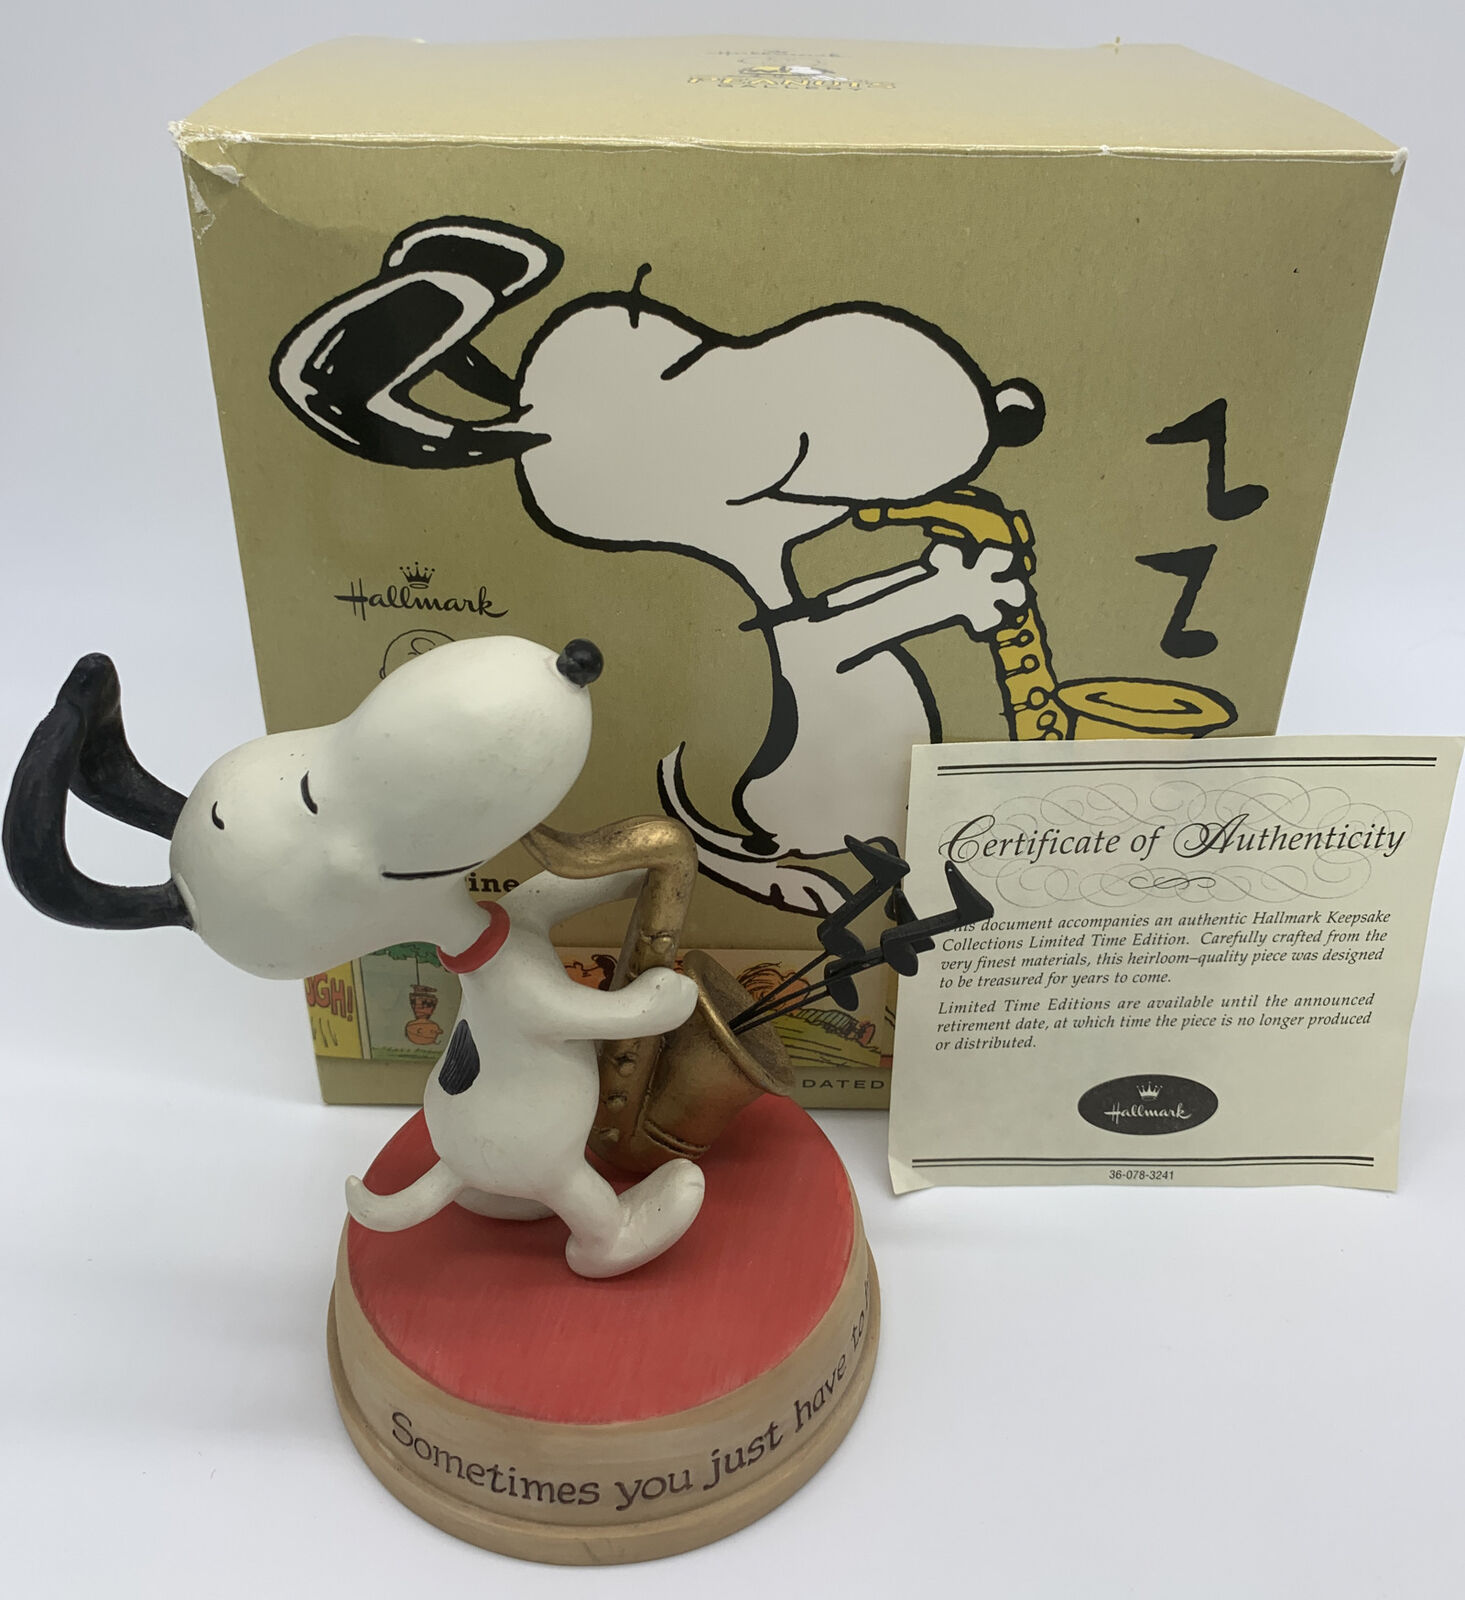 Hallmark Peanuts Gallery Snoopy Sometimes You Just Have To Improvise 2010 Figure